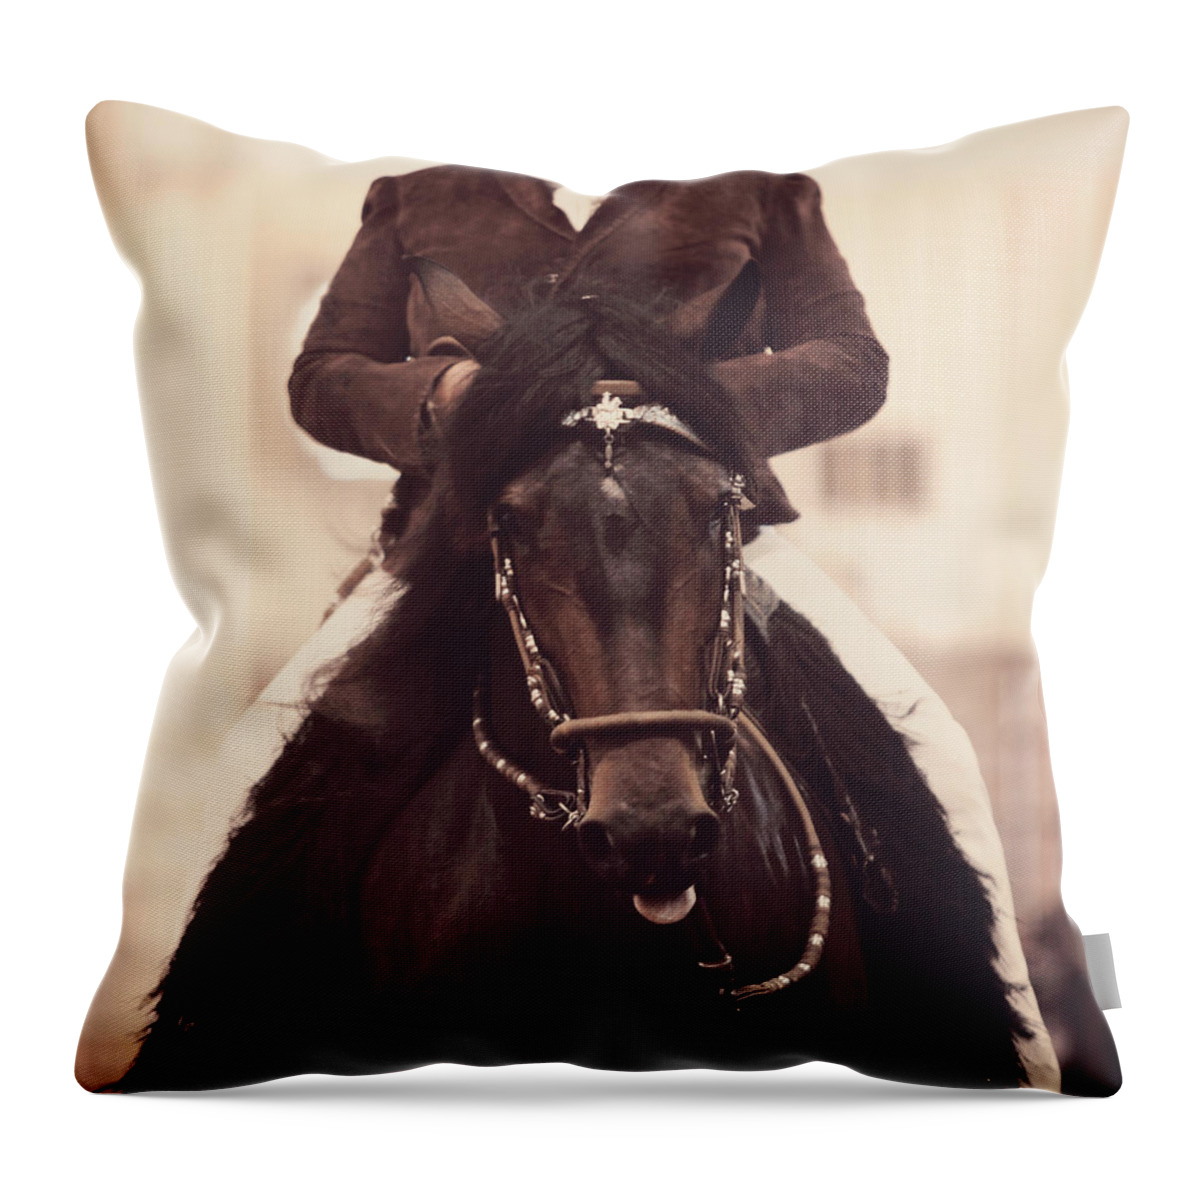 Horse Throw Pillow featuring the photograph Peruvian Horse Rider by Toni Hopper